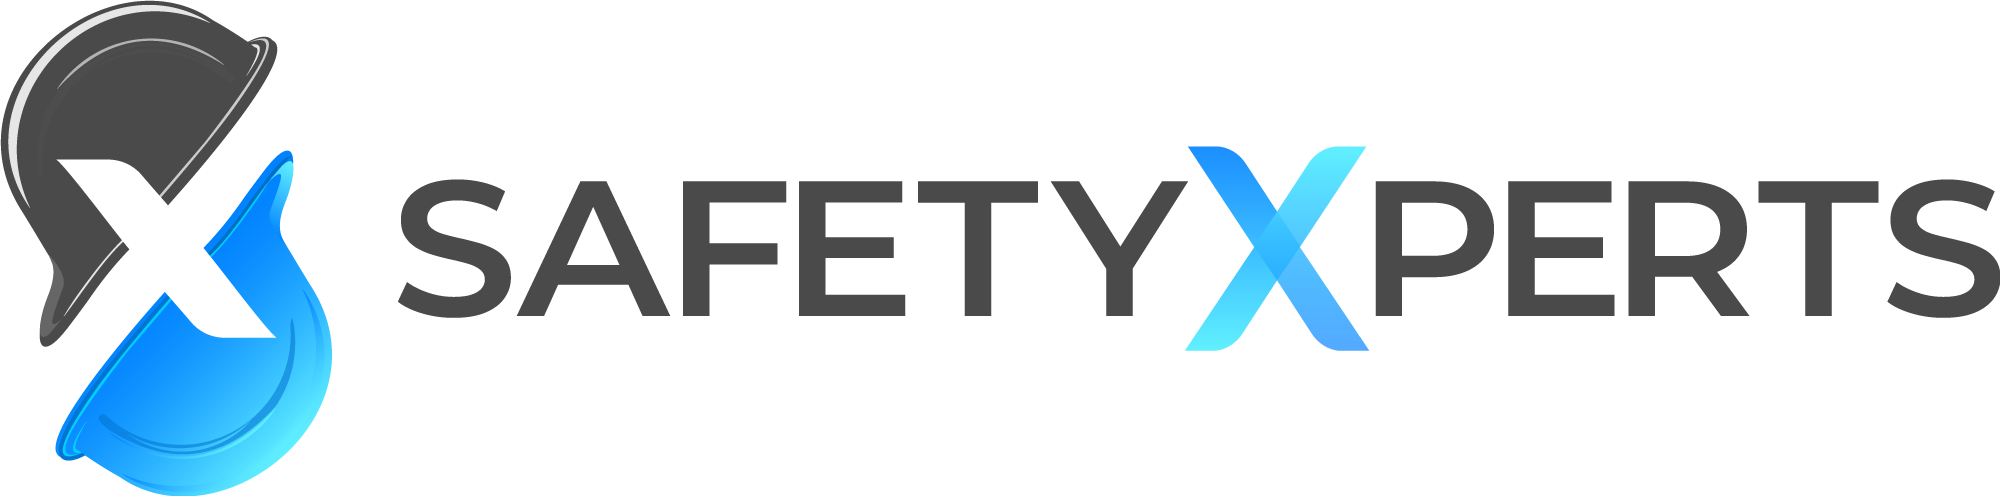 Safetyxperts